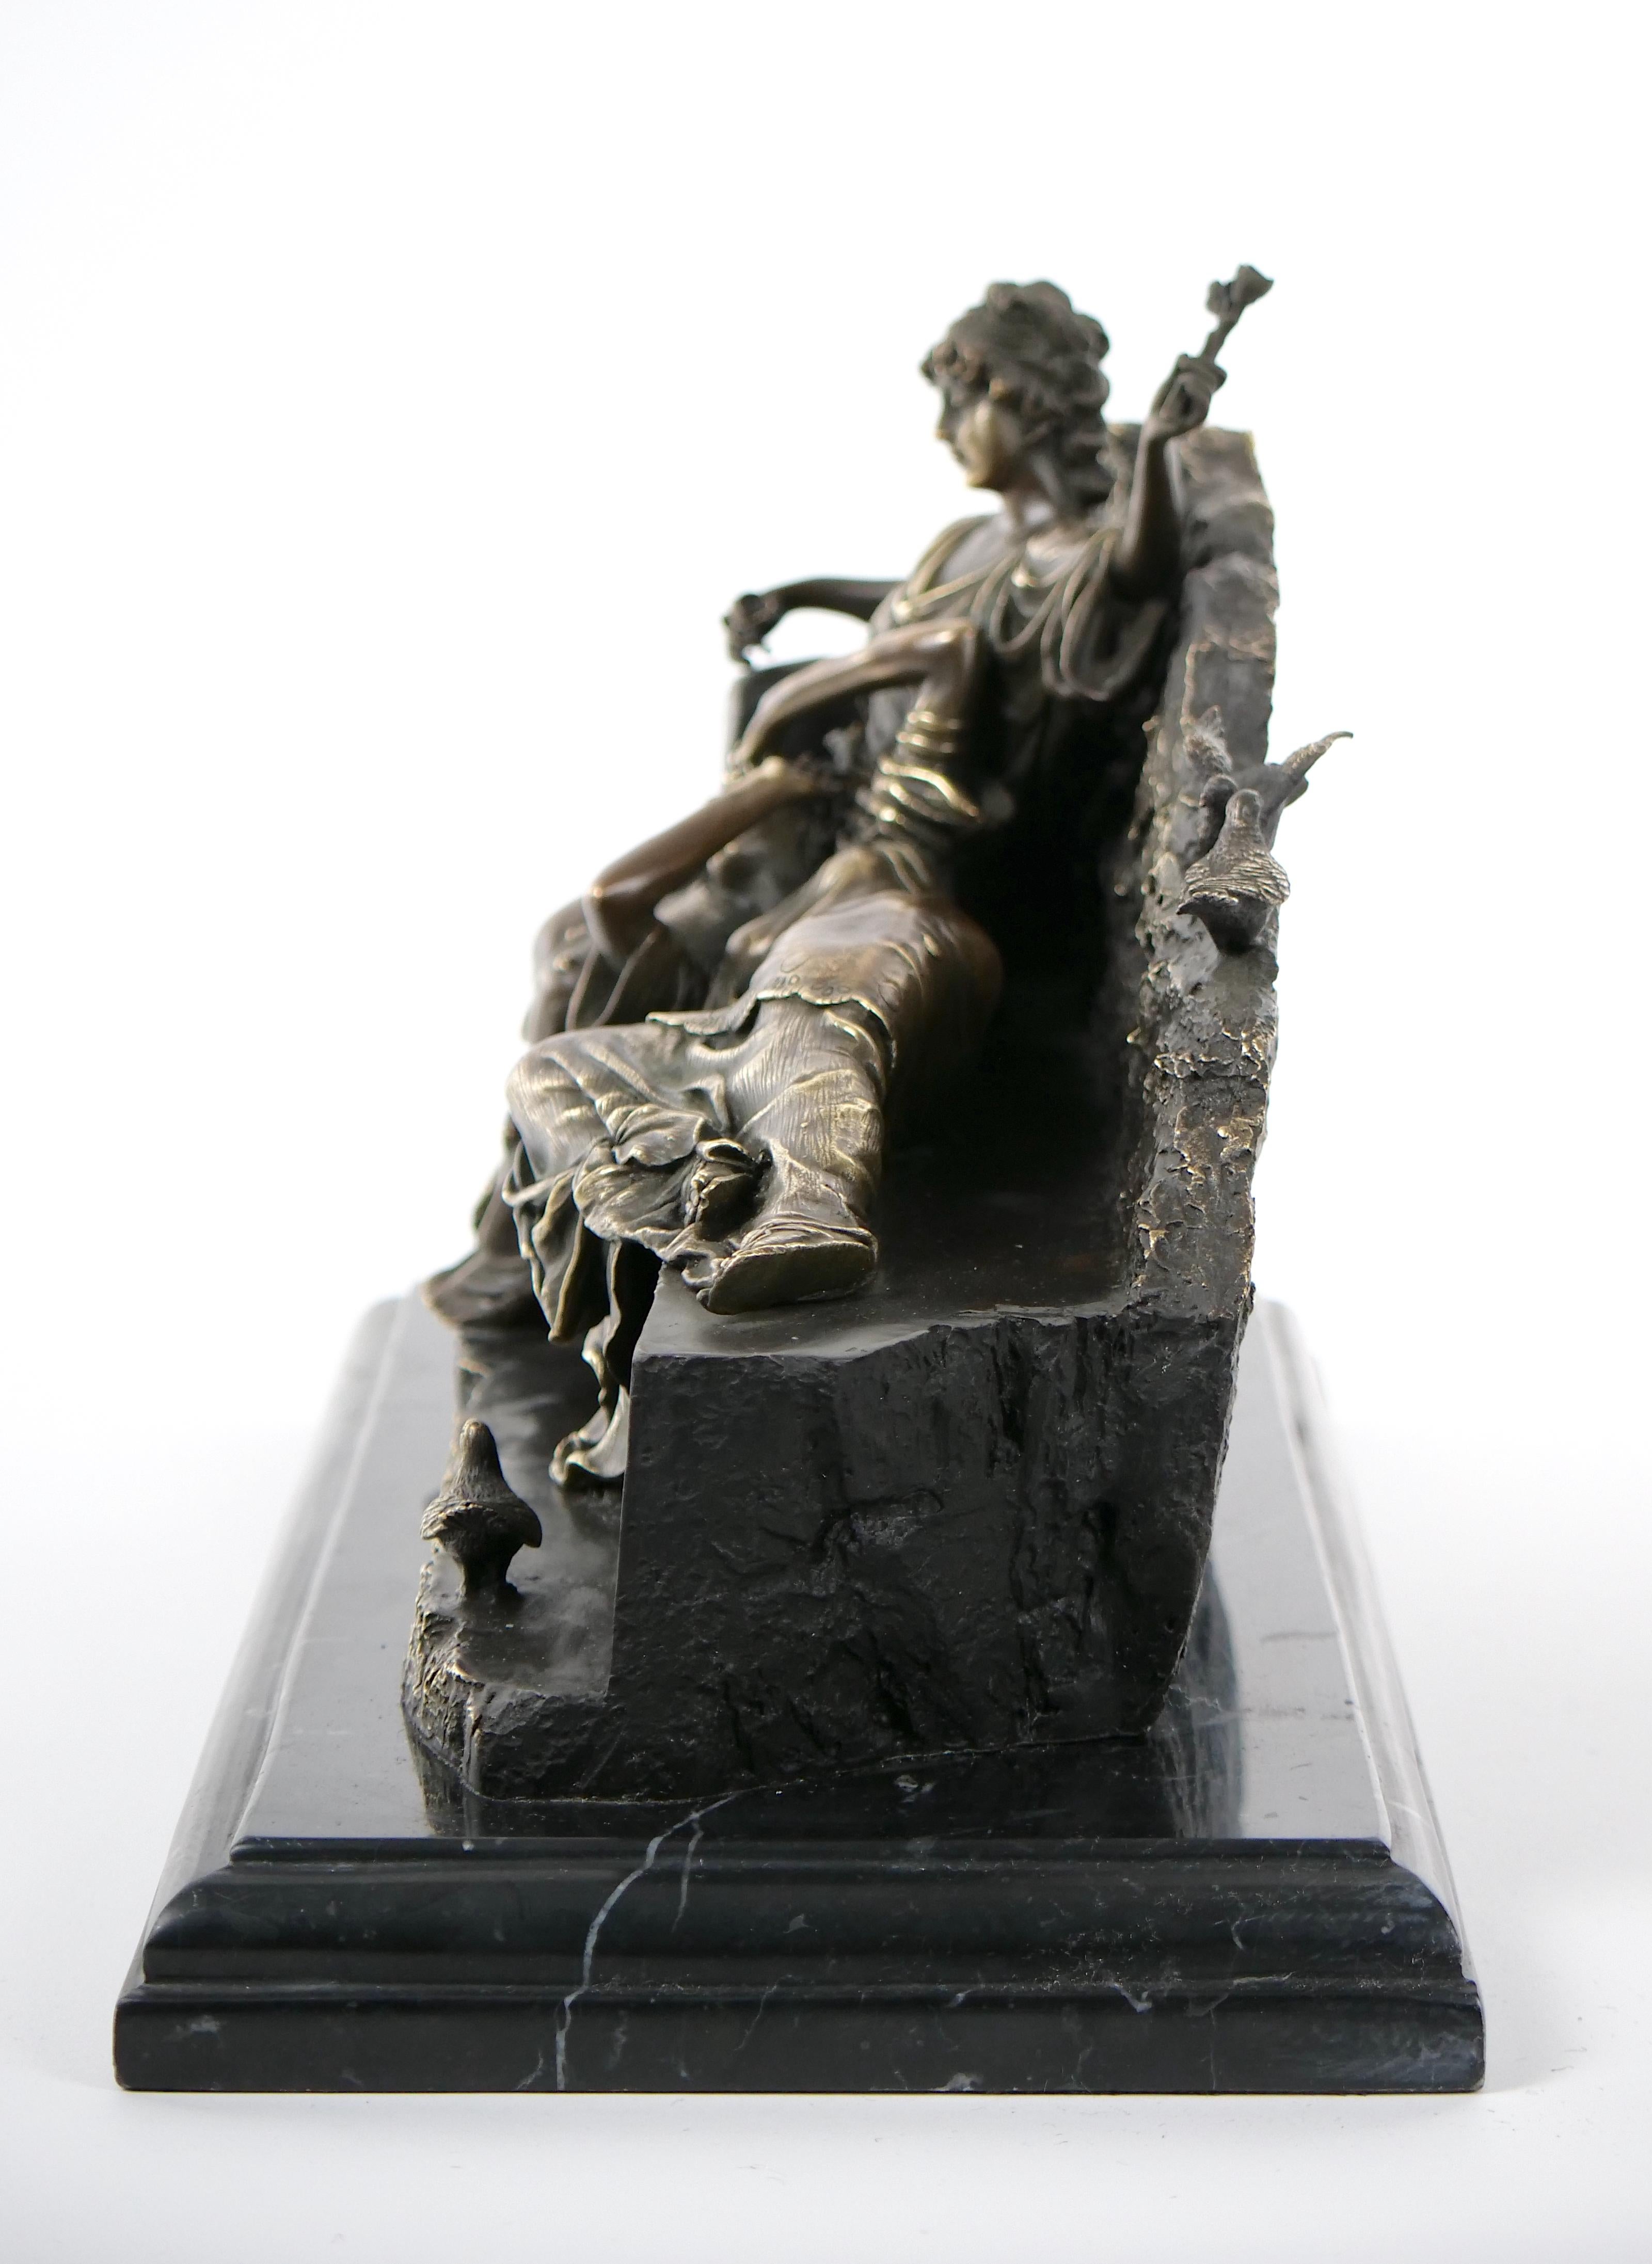 
Indulge in the captivating allure of our romantic reclining gilt-patinated bronze sculpture by the renowned artist Miguel Fernando Lopez, also know as Milo. This exquisite piece showcases the artistry of maidens figures in a display of timeless